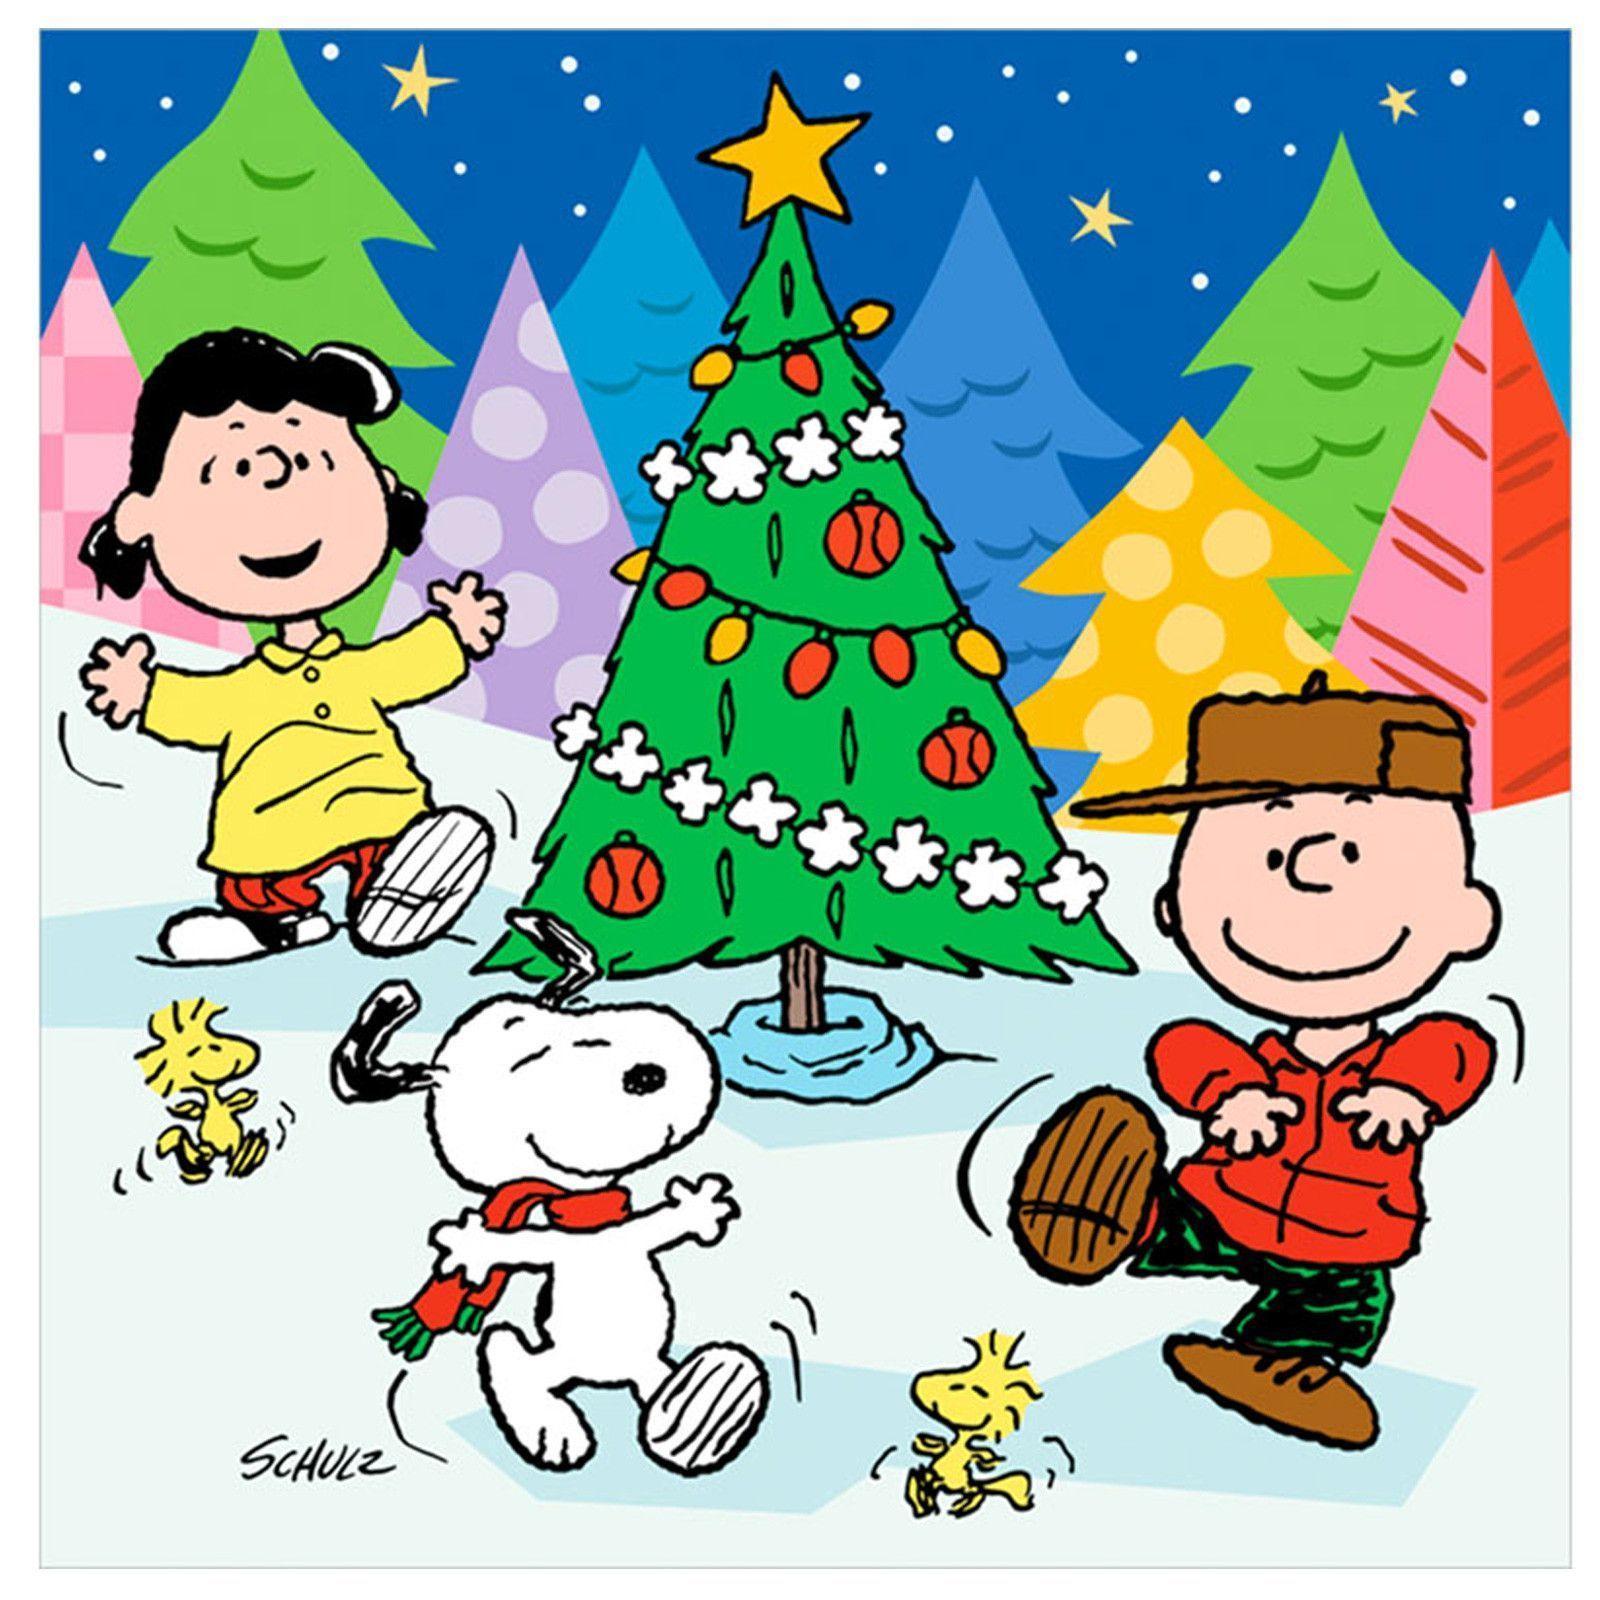 Snoopy Christmas Wallpapers Top Free Snoopy Christmas Backgrounds Wallpaperaccess